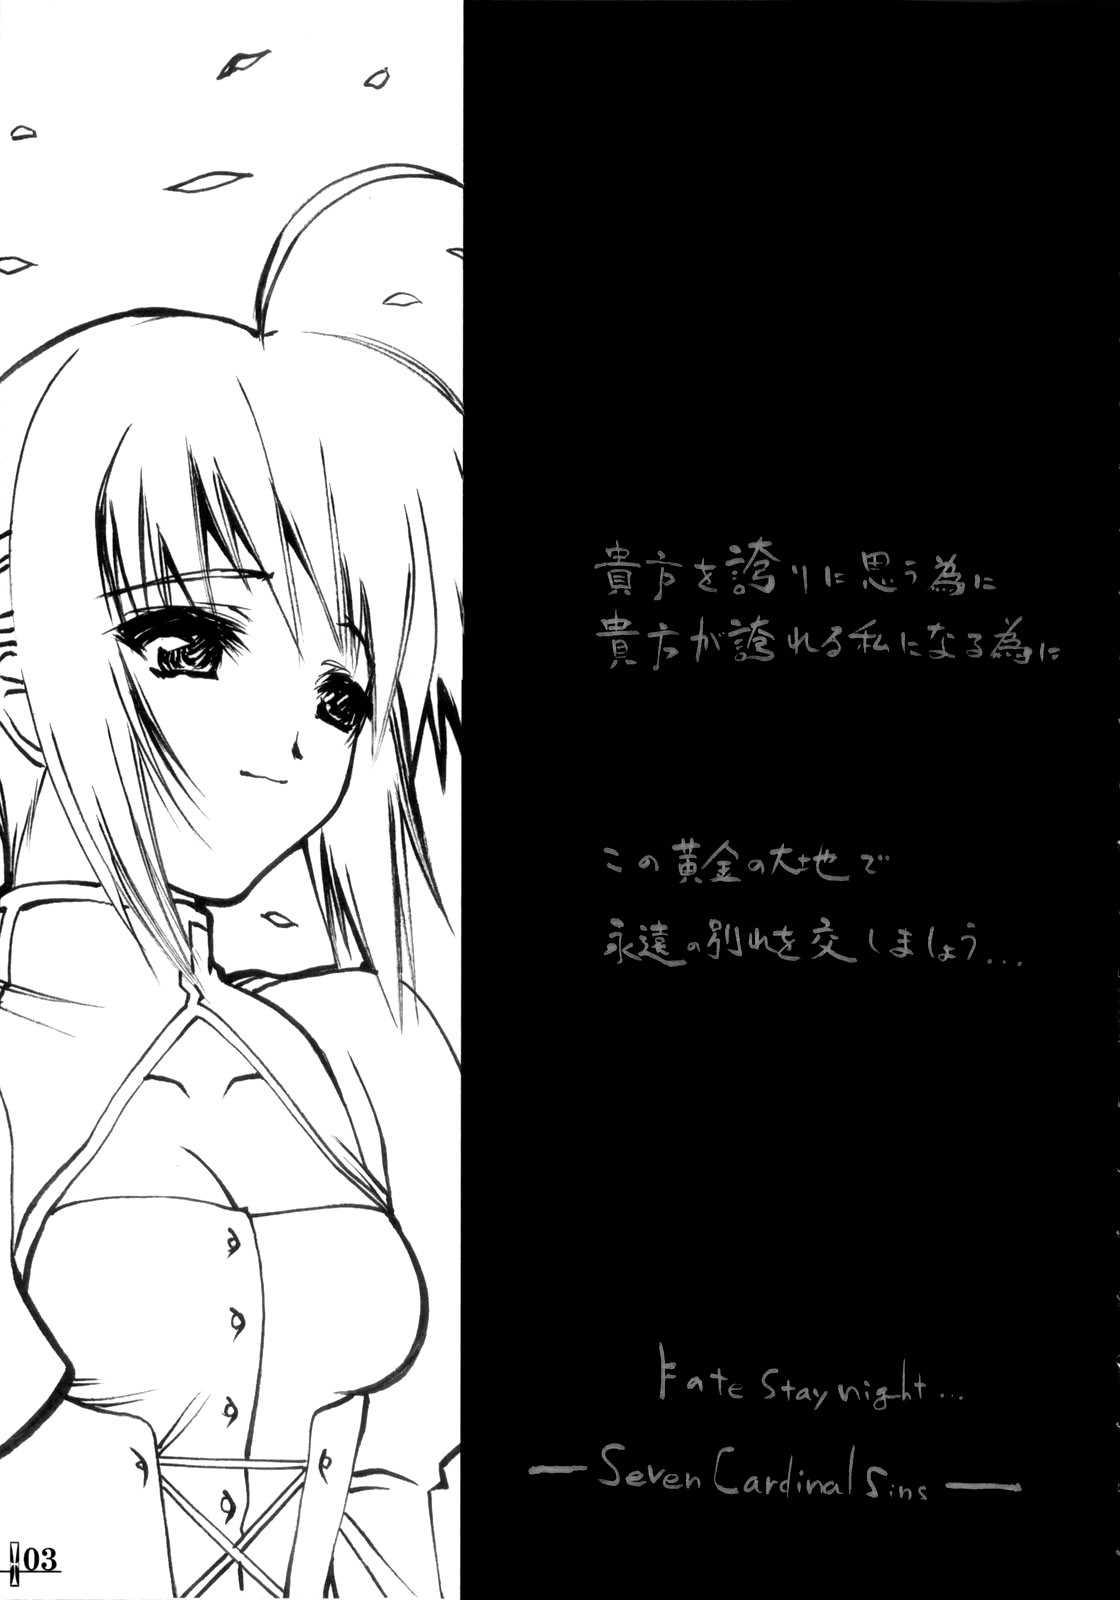 Anal Porn Seven Cardinal Sins みりおんばんく - Fate stay night Asstomouth - Picture 2